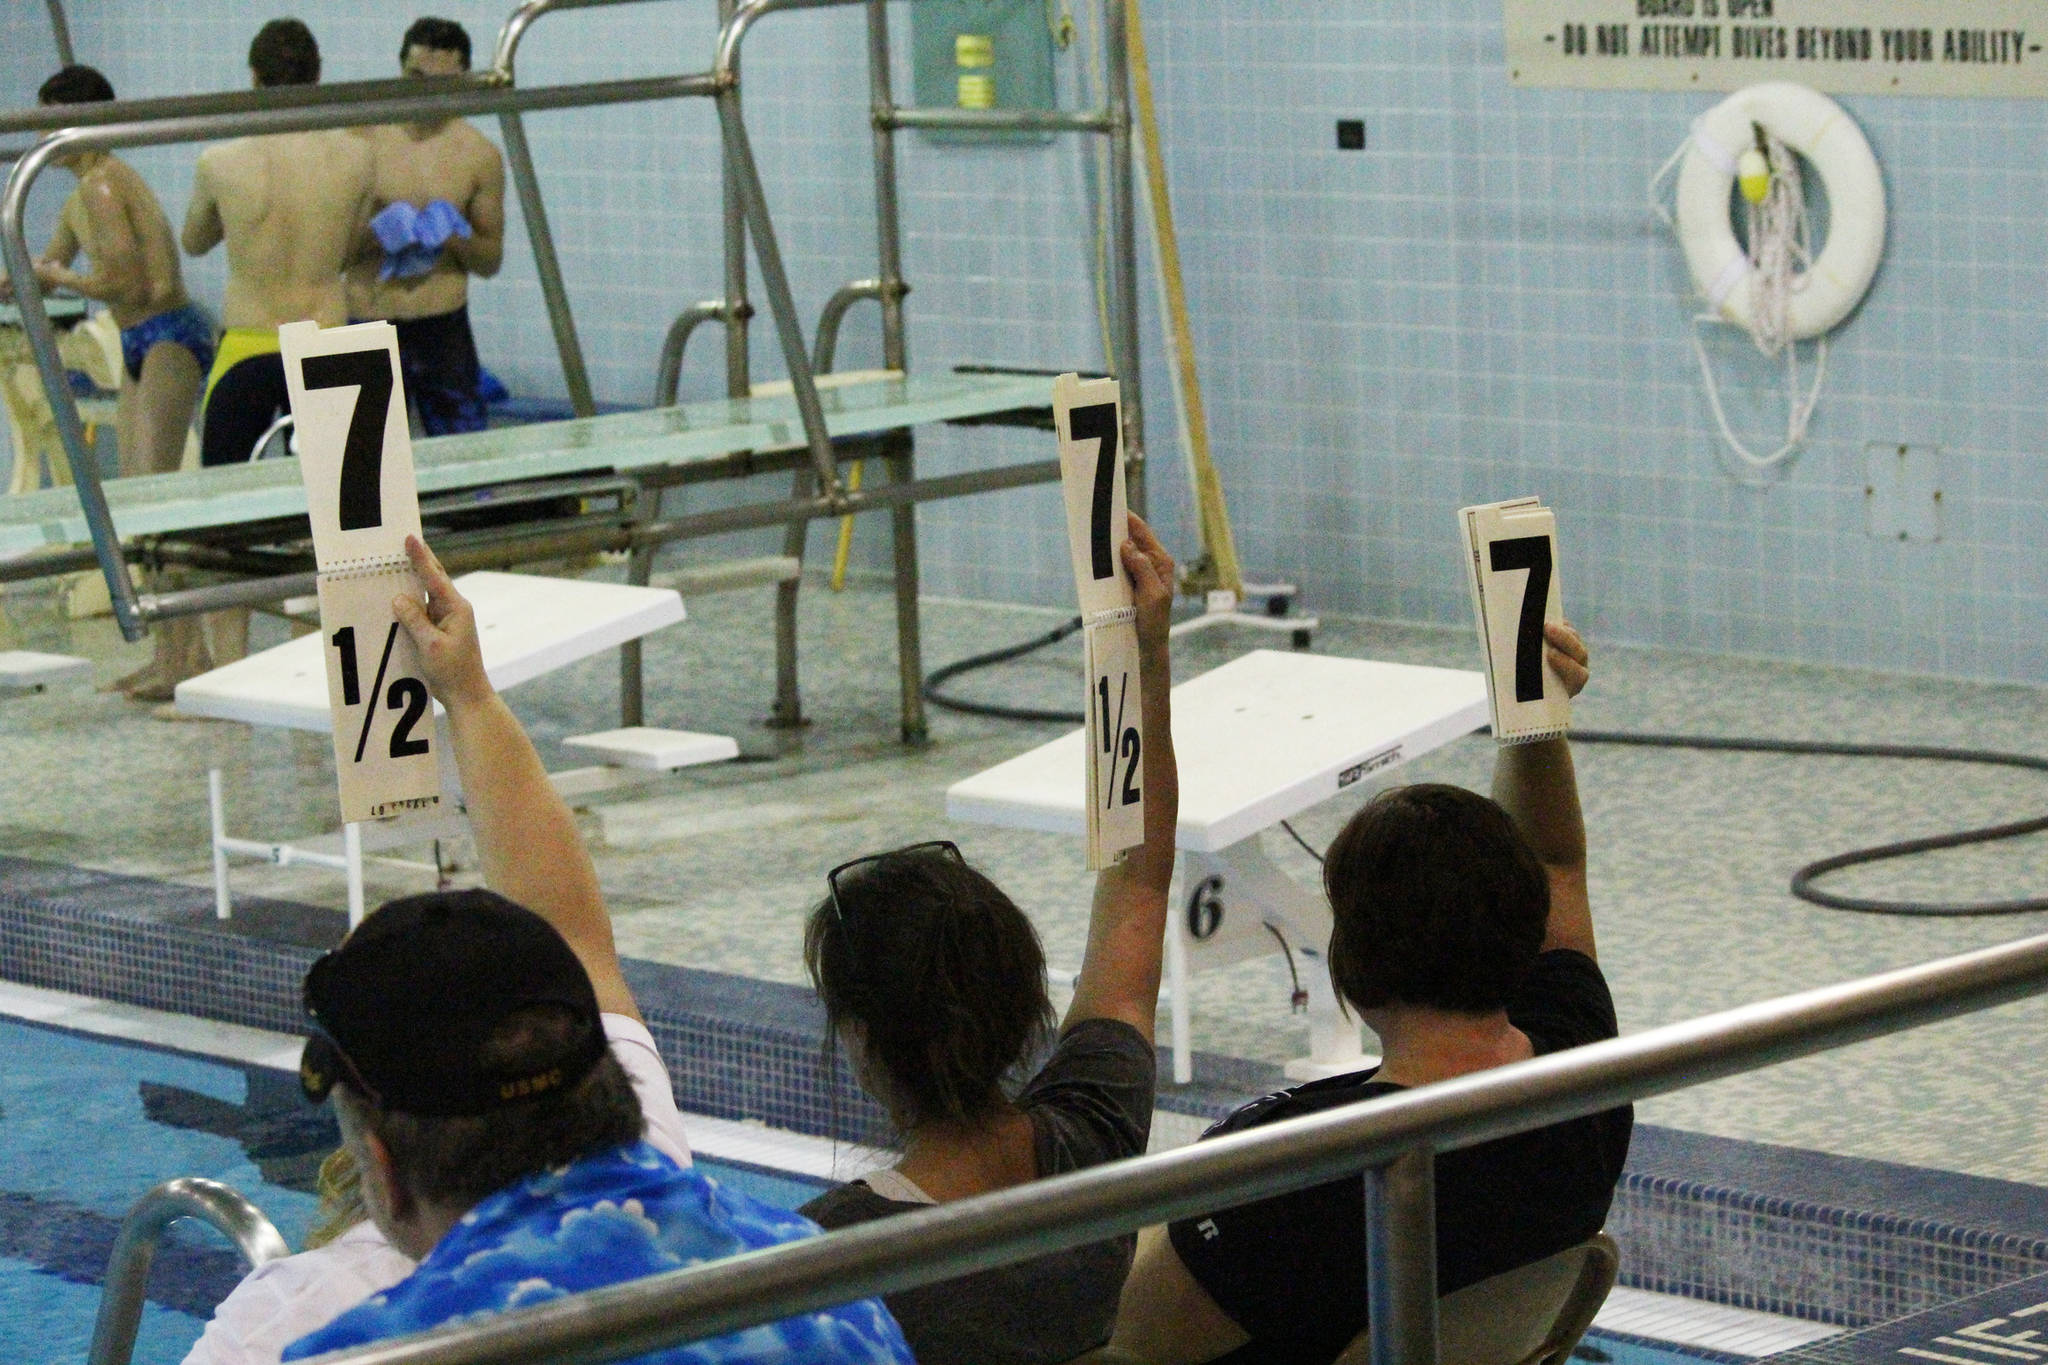 Judges hold up their scores during the diving portion of the Homer Invitational on Friday, Sept. 8, 2017 at the Kate Kuhns Aquatic Center in Homer, Alaska. (Photo by Megan Pacer/Homer News)